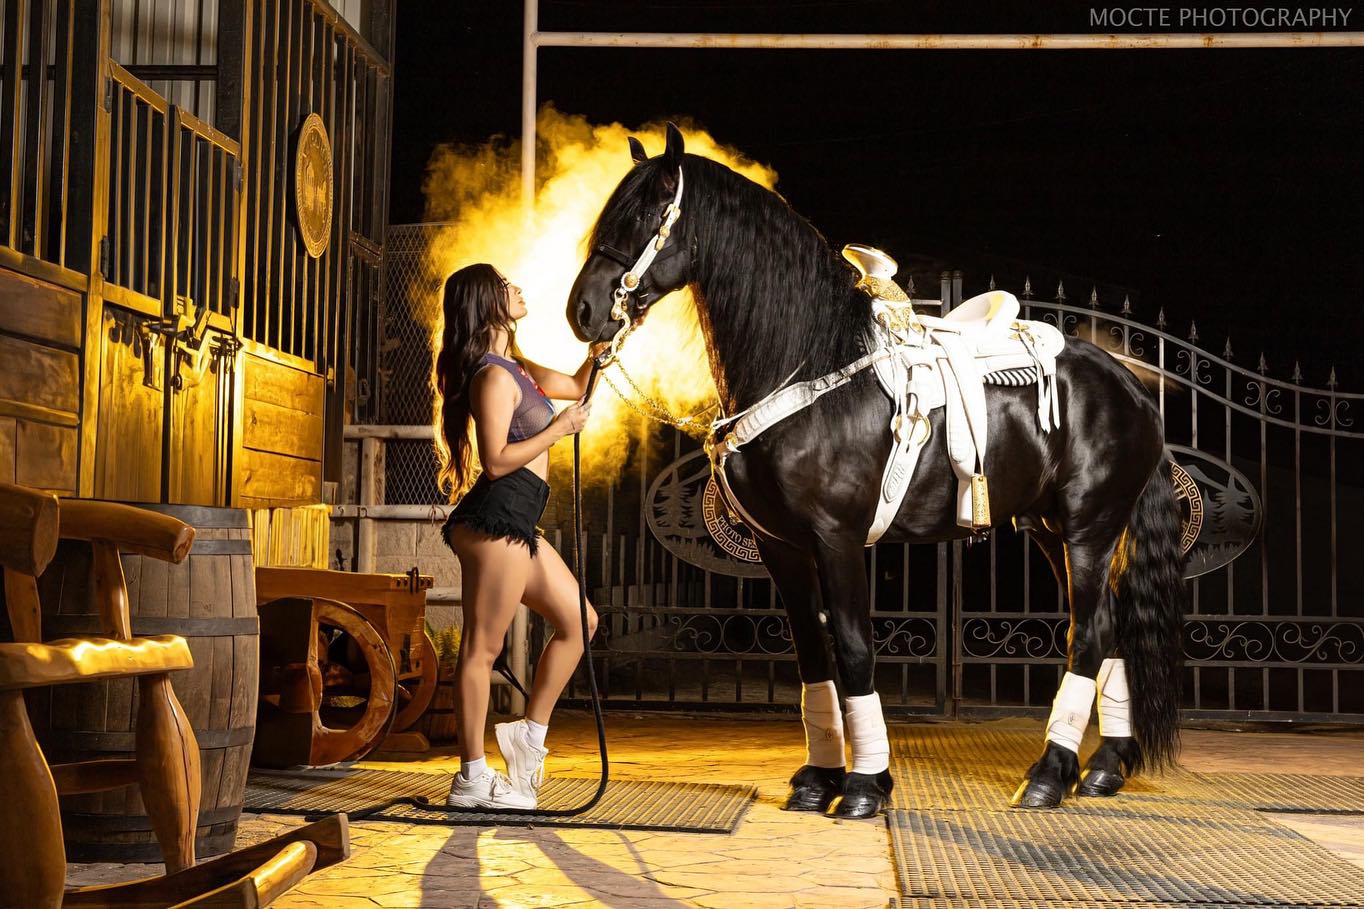 🖤✨ Behind the Scenes Magic ✨🖤

Swipe left to dive into the enchanting world of our amazing photoshoot, featuring the stunning elegance of @yarabithbolivar and the majestic beauty of the serene black stallion. Together, they create a vision of strength and grace that’s simply breathtaking.

📸 Captured by: @moctephotography 

Location: @ajranchphotos